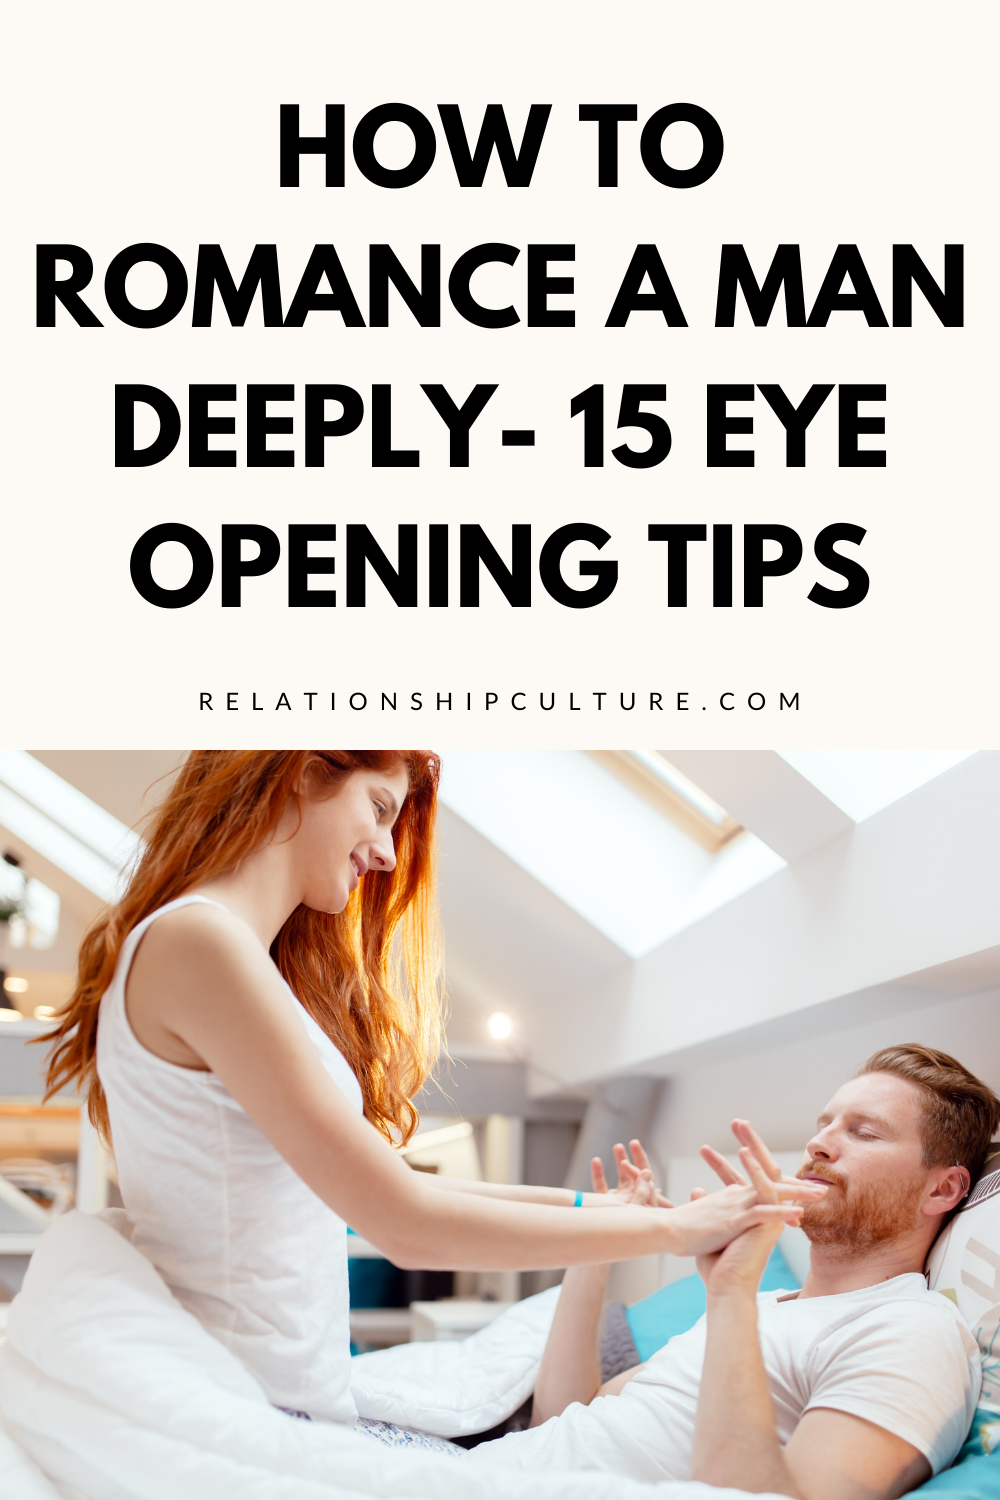 romantic ideas for him at home